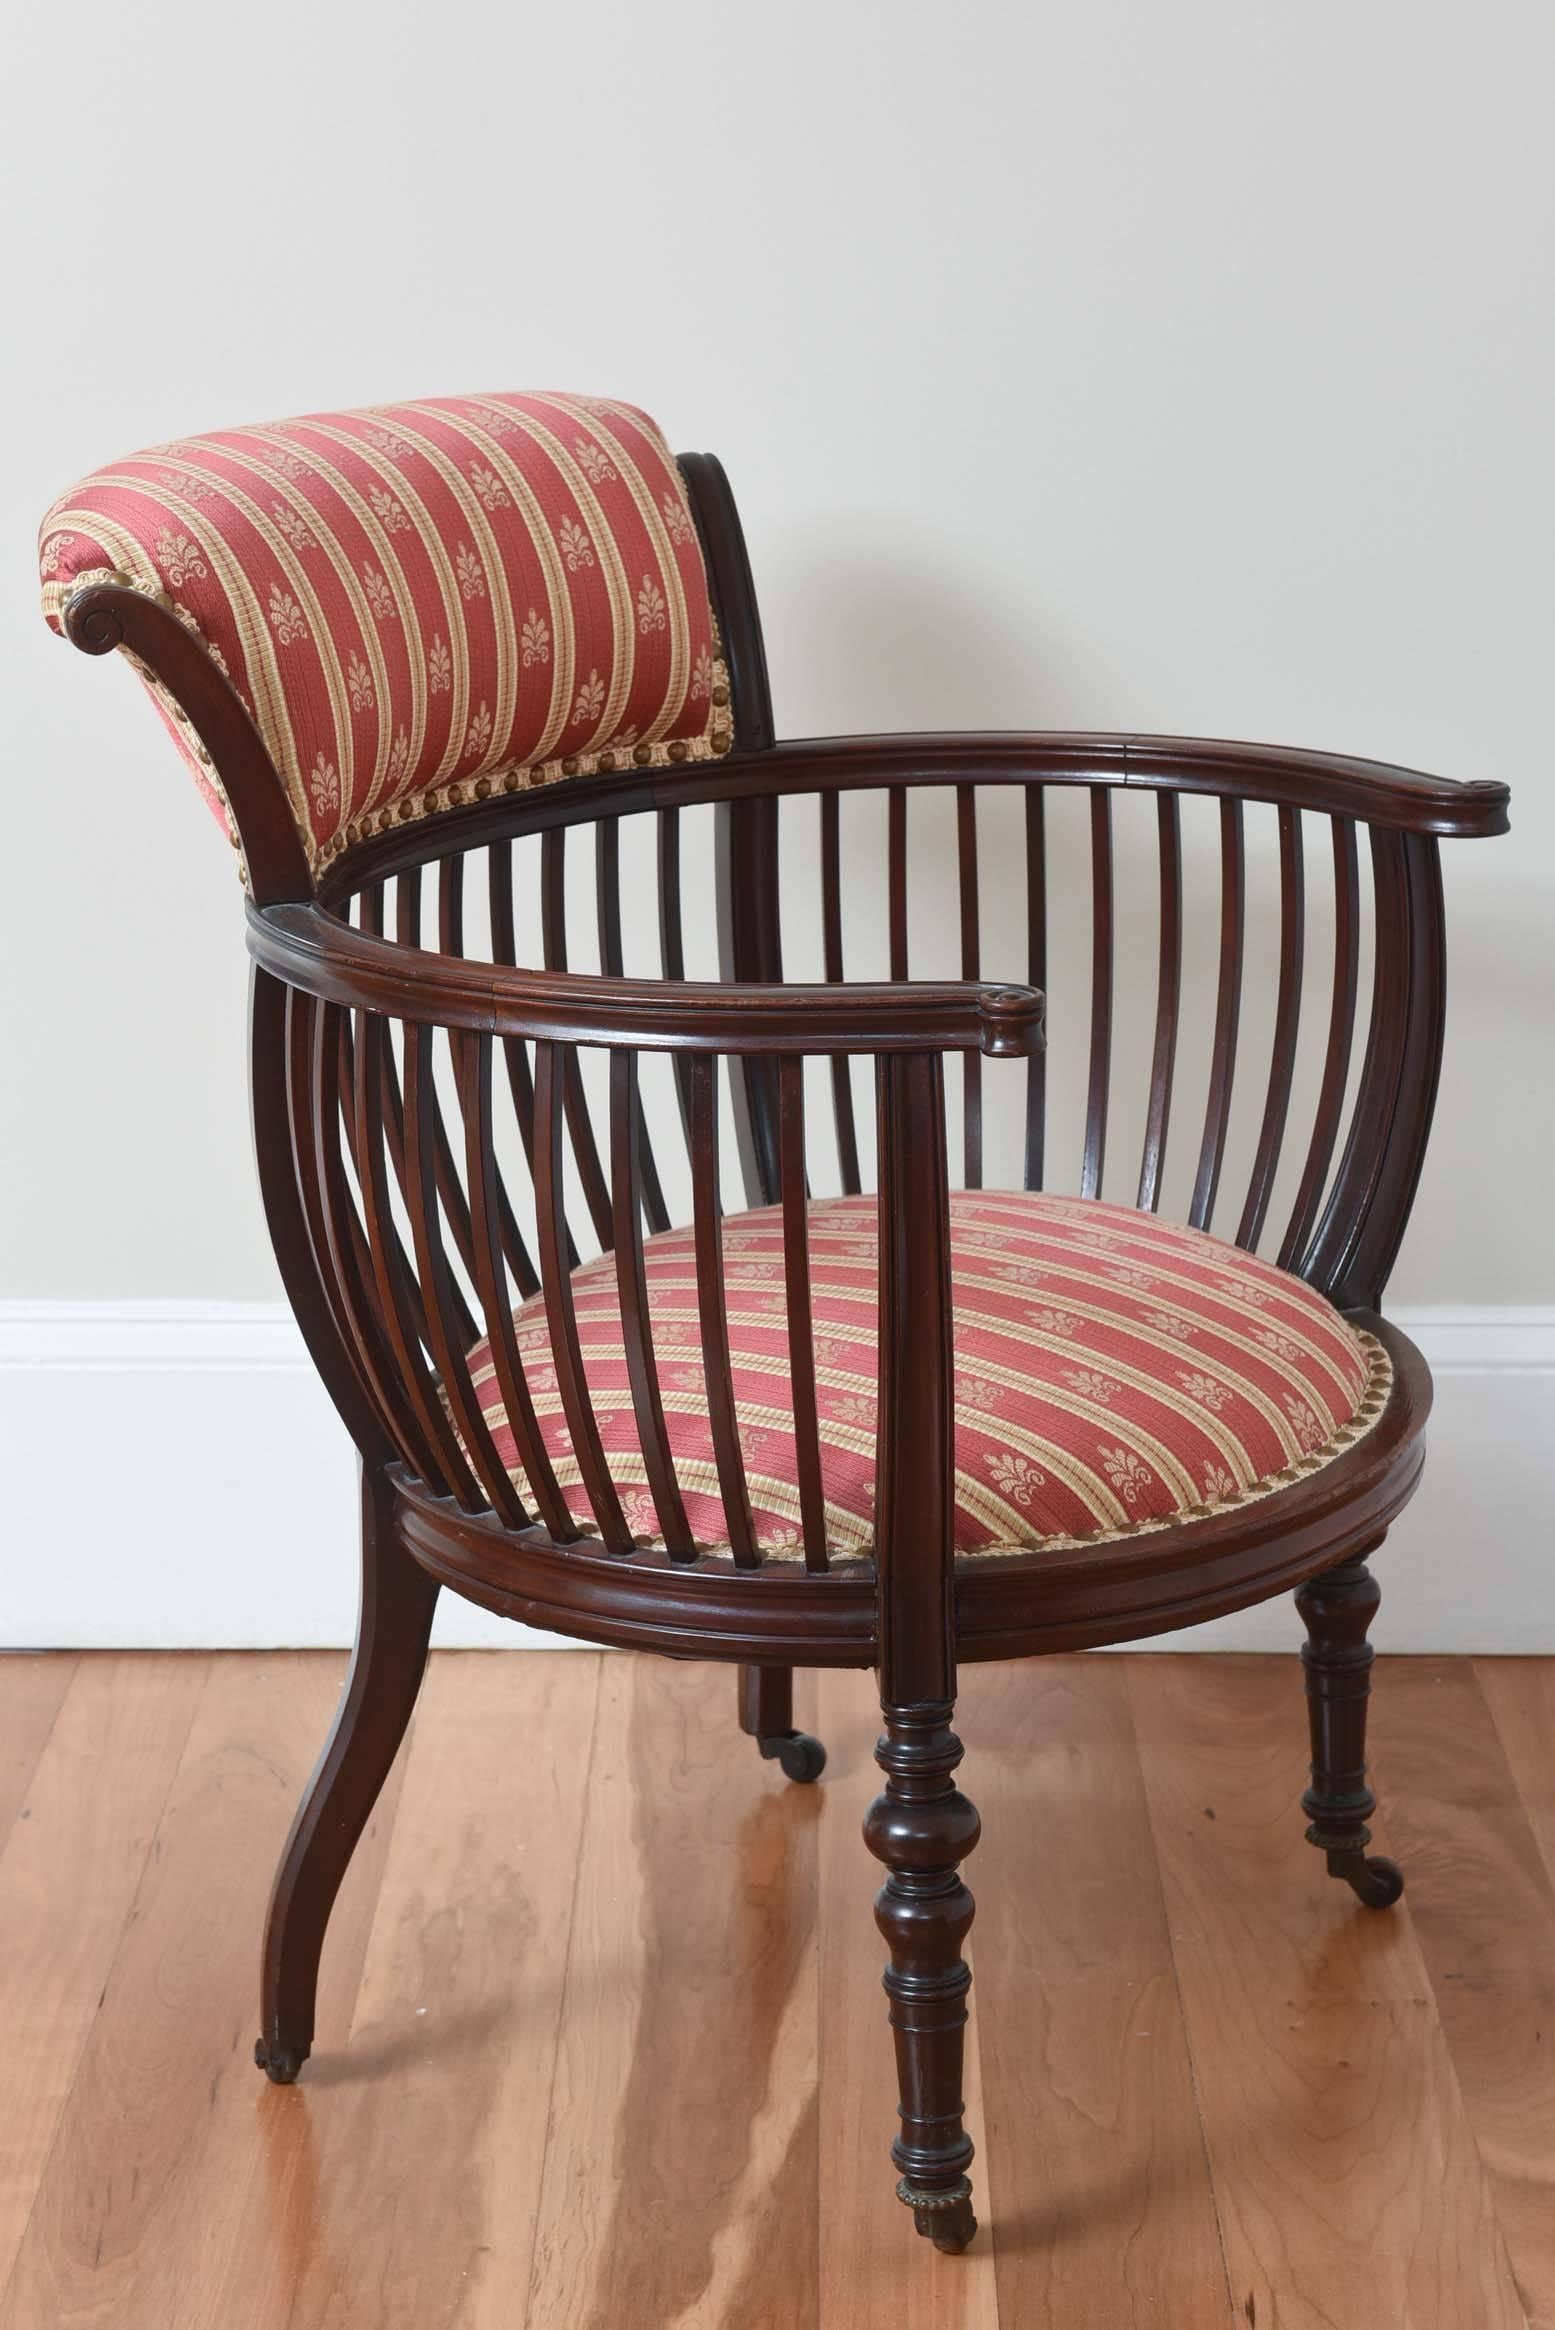 Antique Curved Back Occasional or Side Chair, Finely Carved with Great Detail (Handgefertigt)